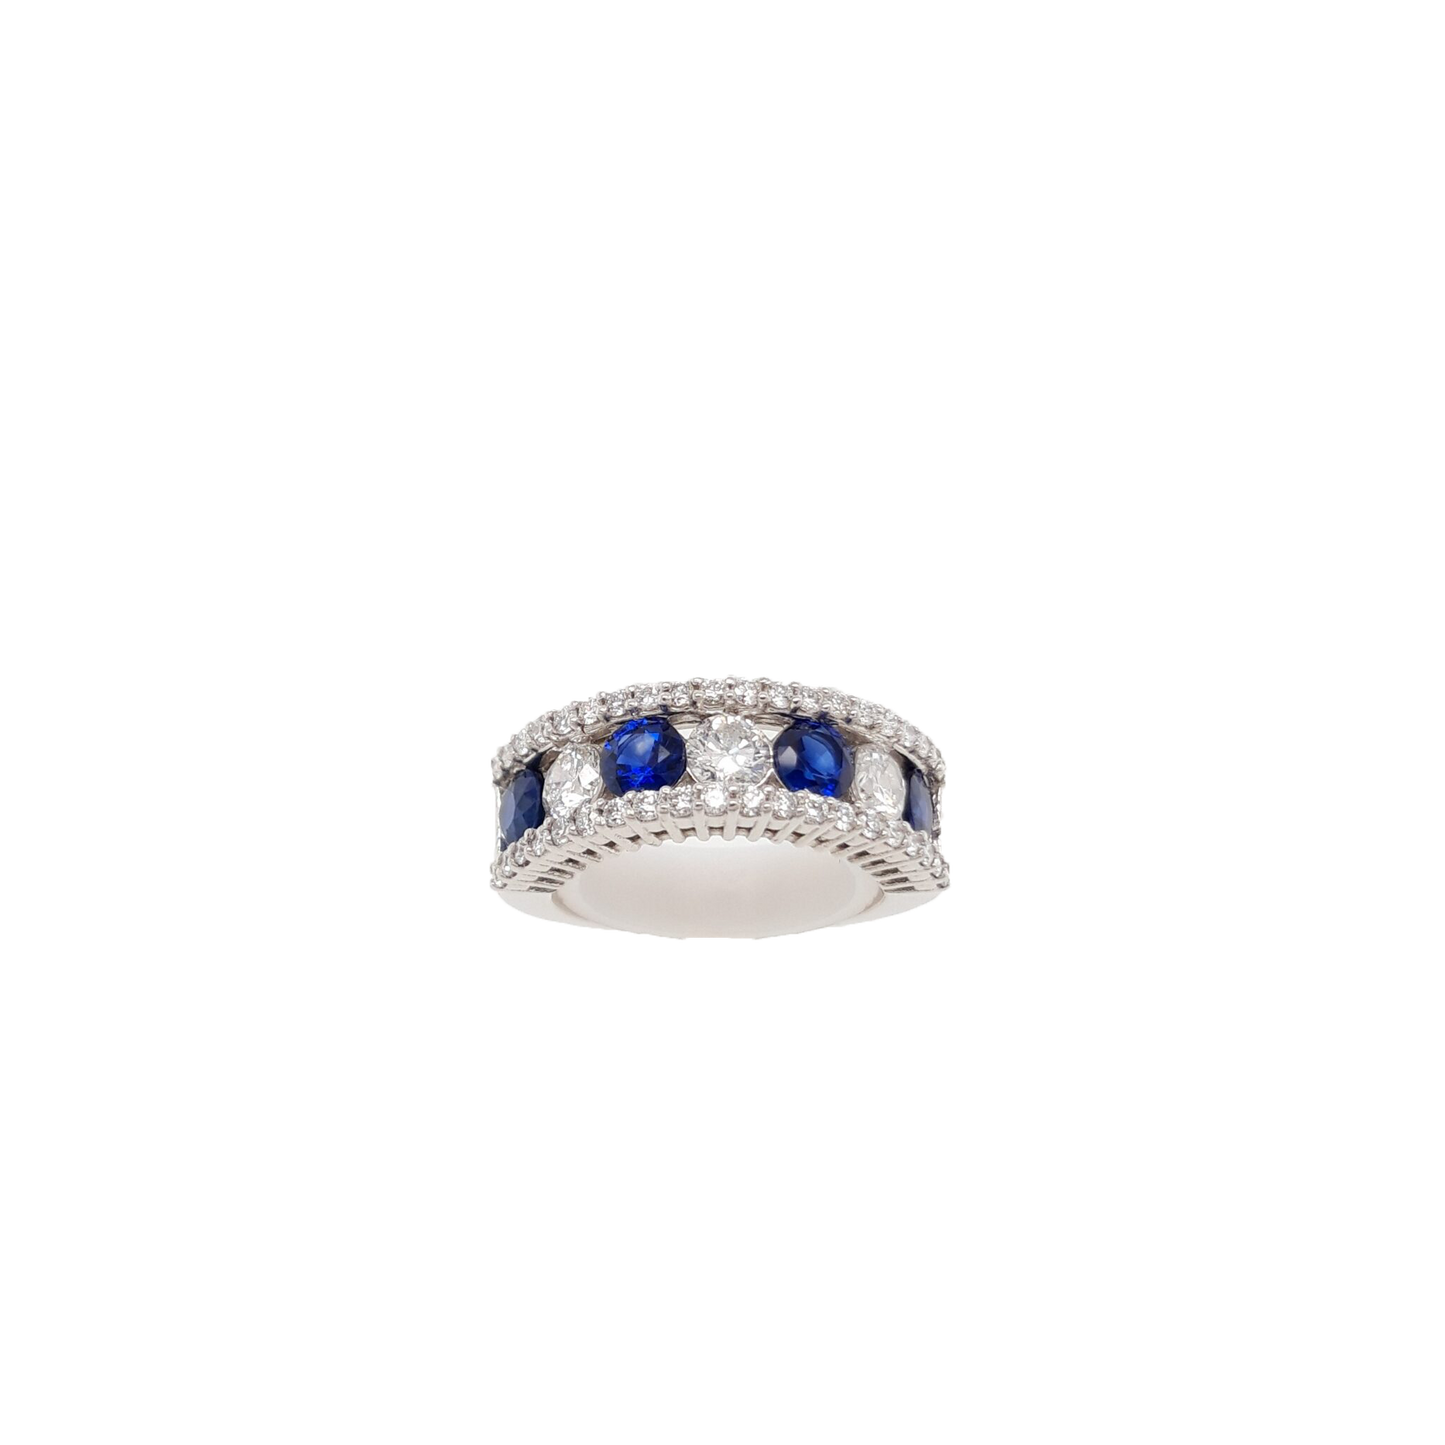 Ladies Diamond Ring With Sapphires 1.30 Carats